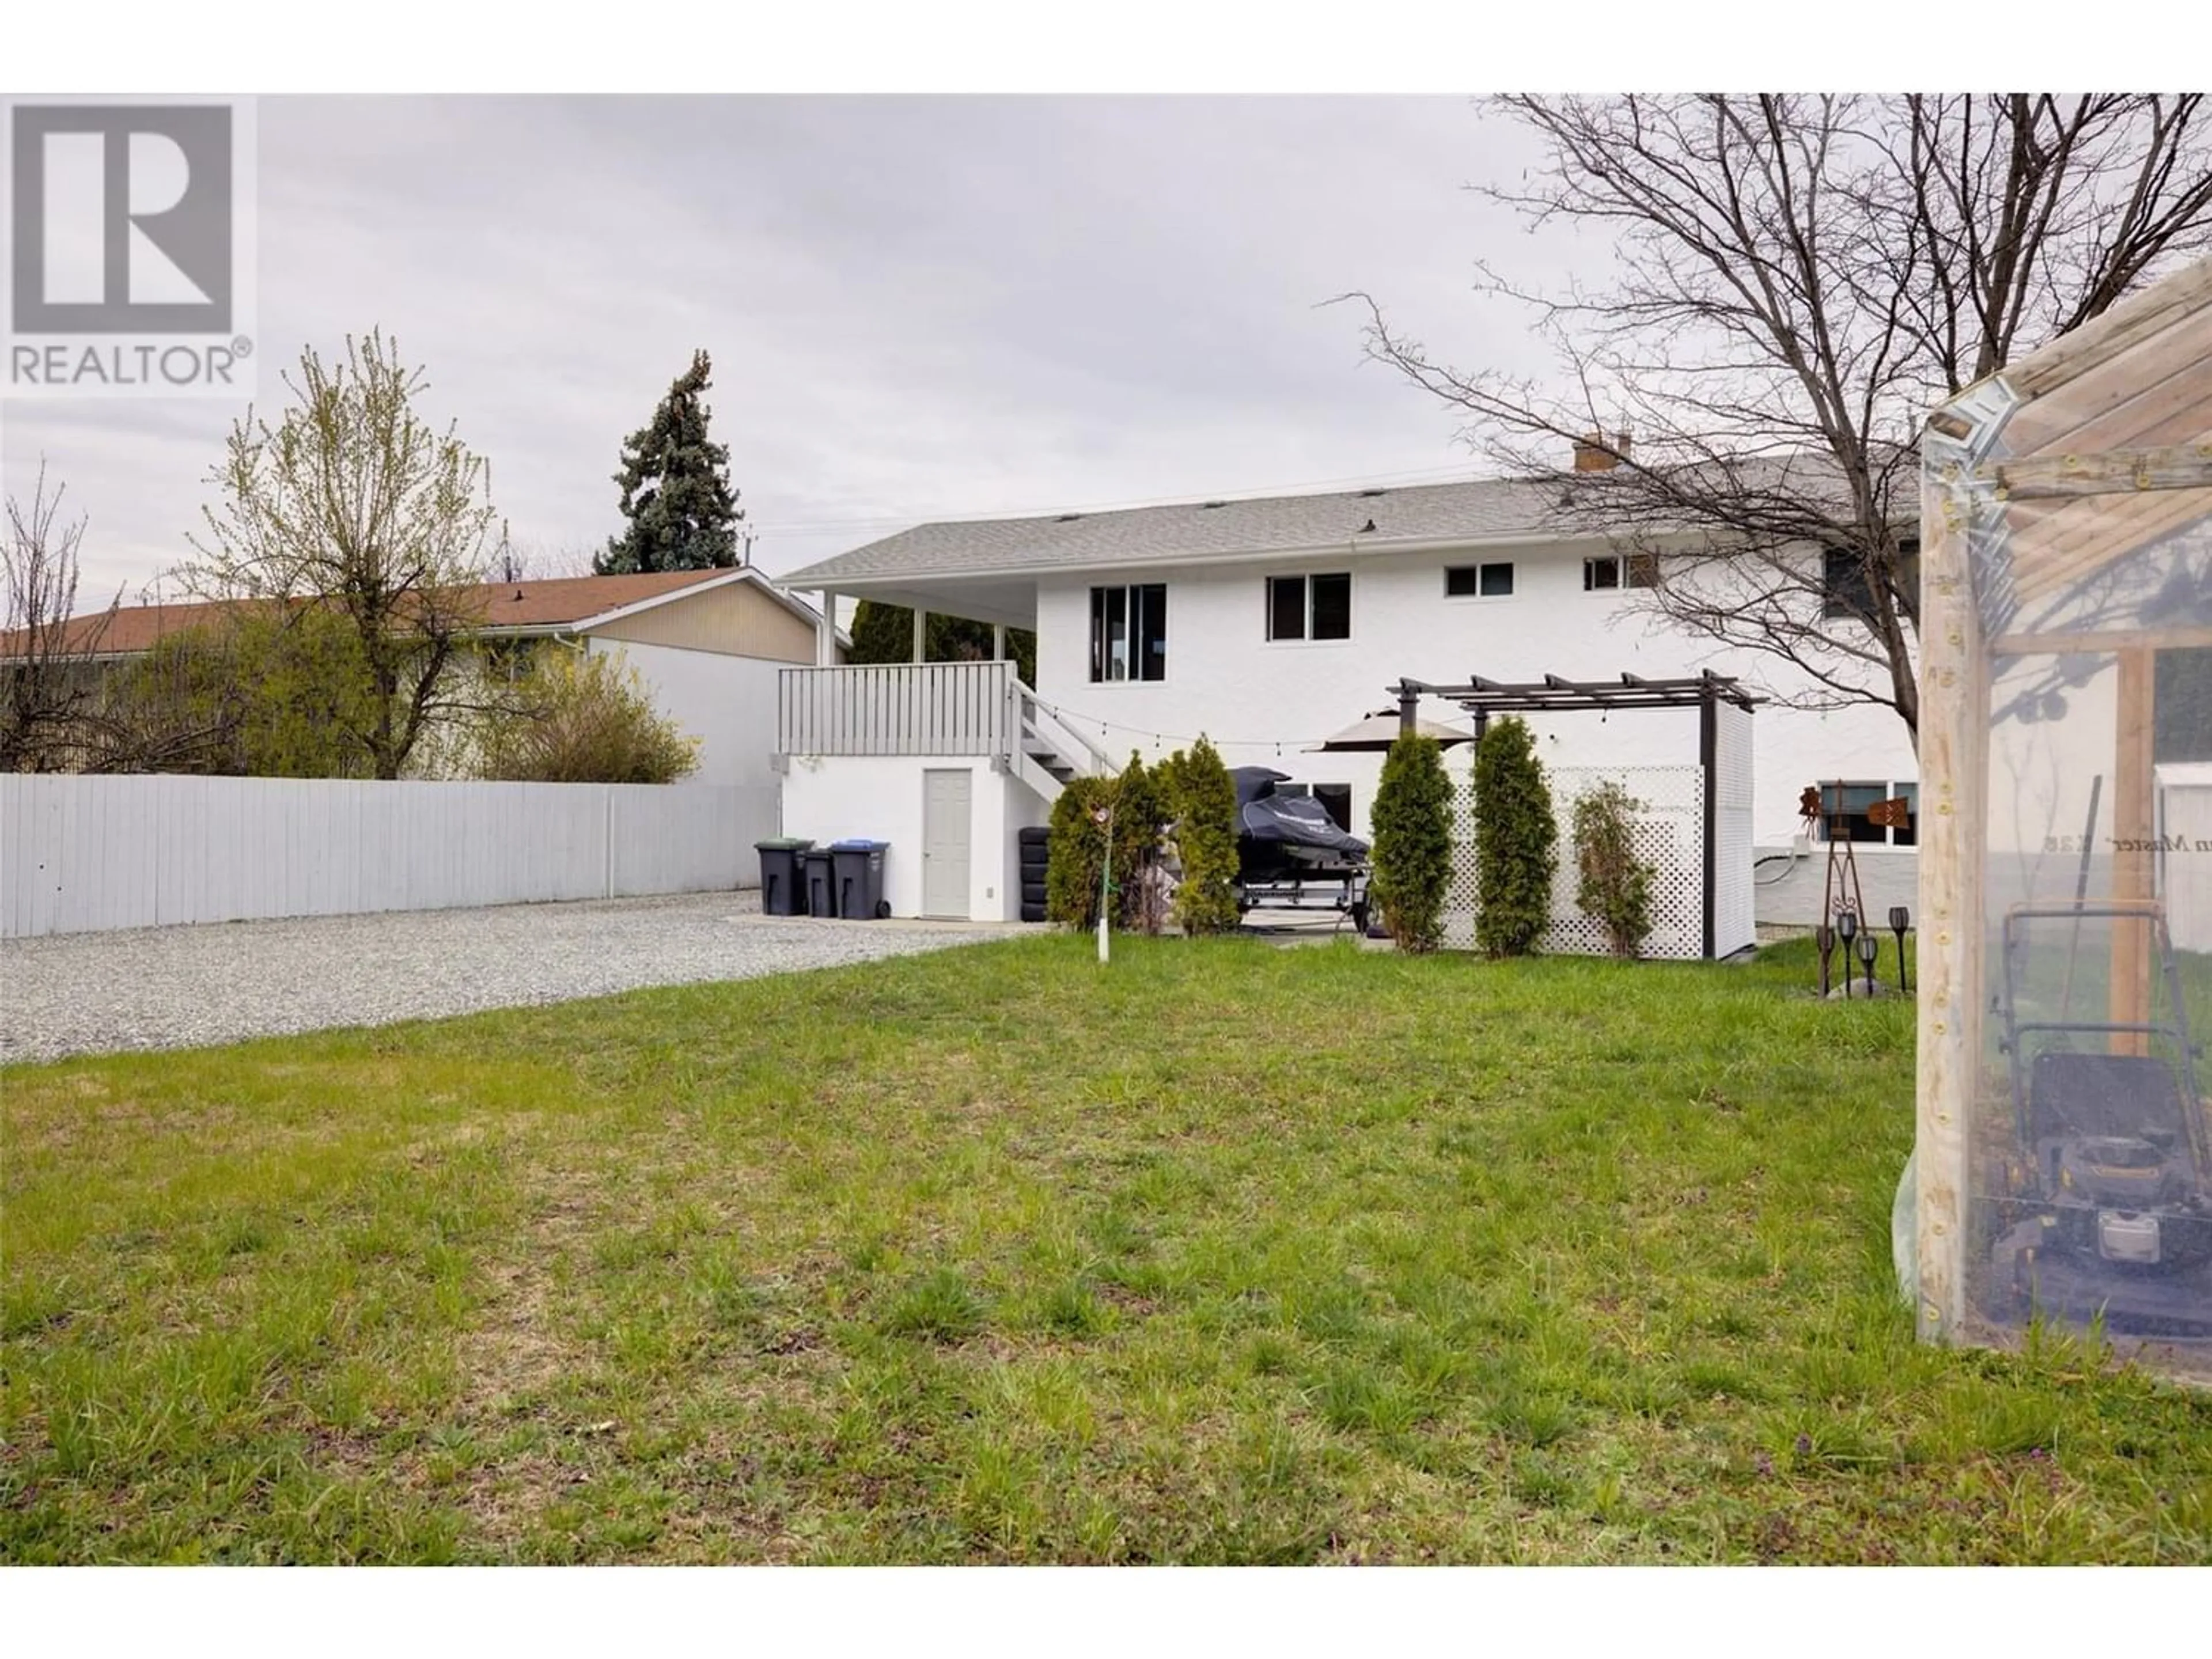 Frontside or backside of a home for 2653 Springfield Road, Kelowna British Columbia V1X1B9